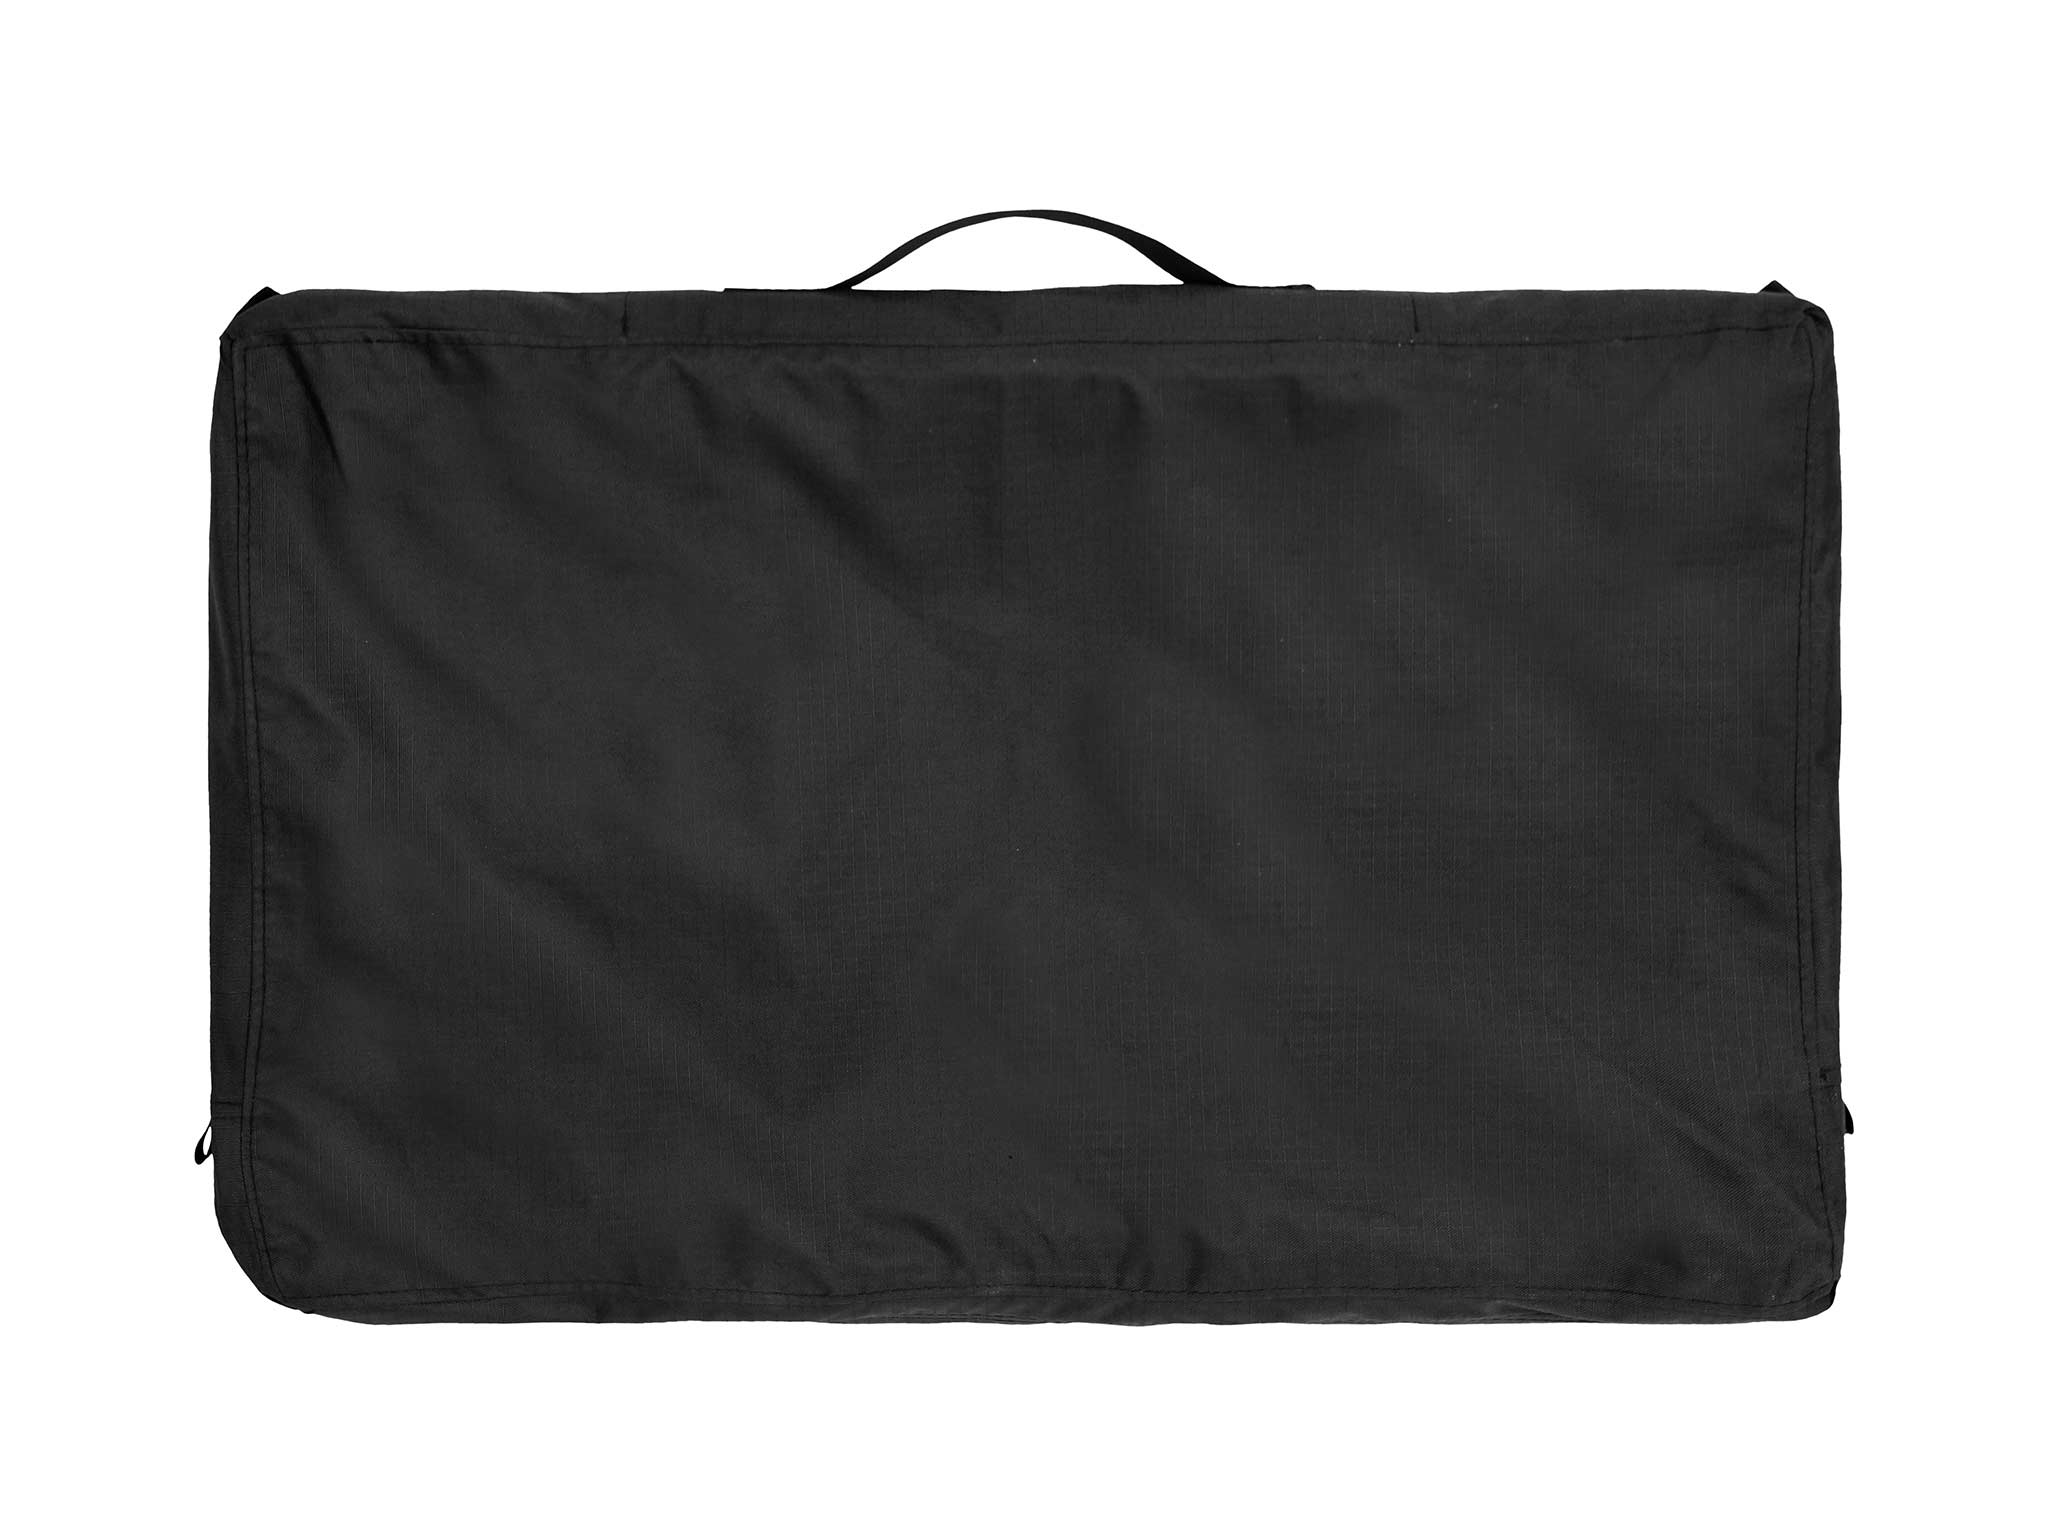 C6 OUTDOOR REV LADDER CARRYING CASE